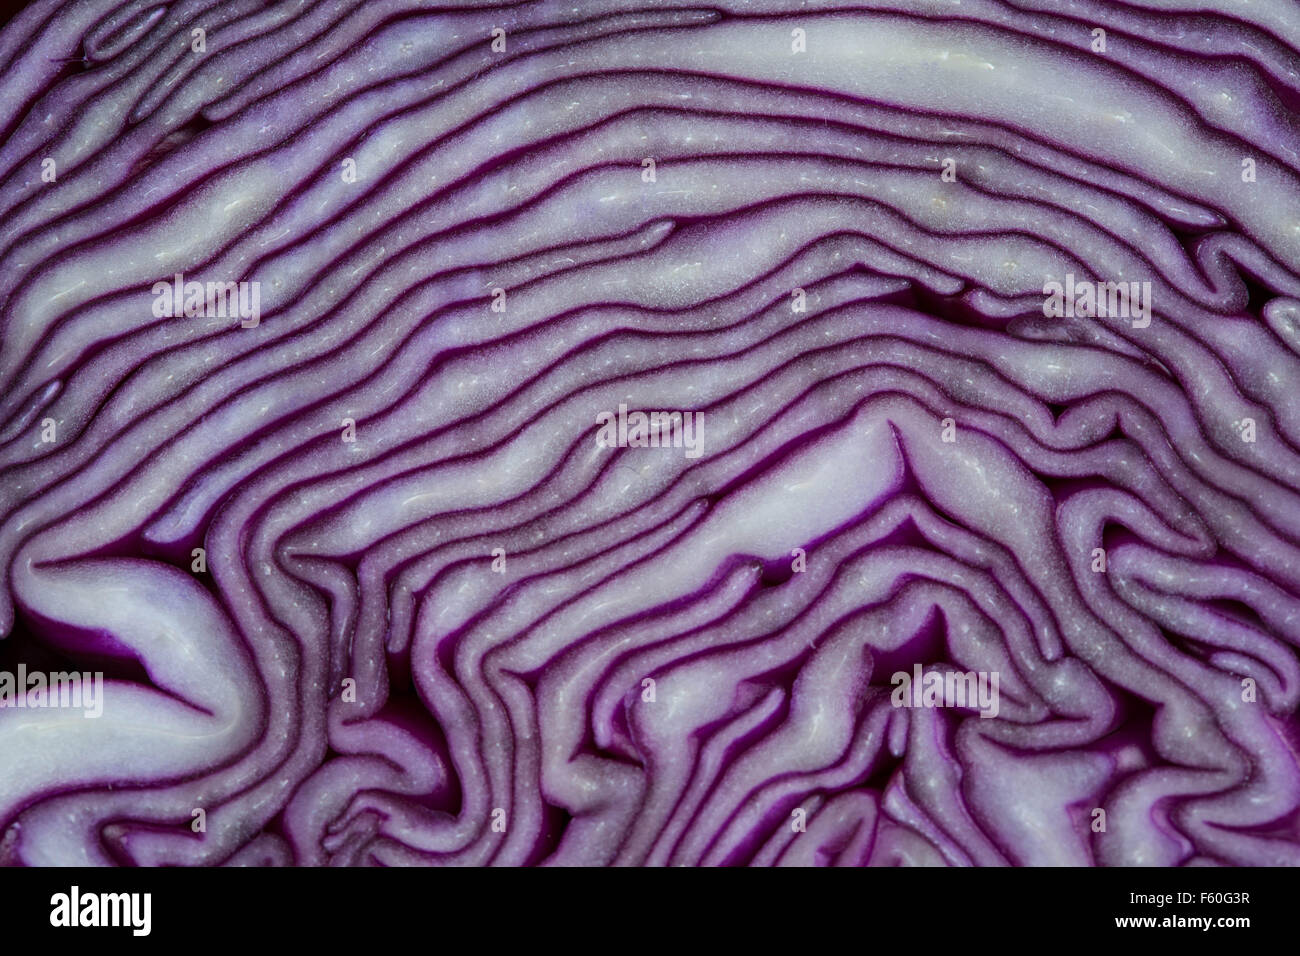 A close up / Macro of a sliced red cabbage Stock Photo